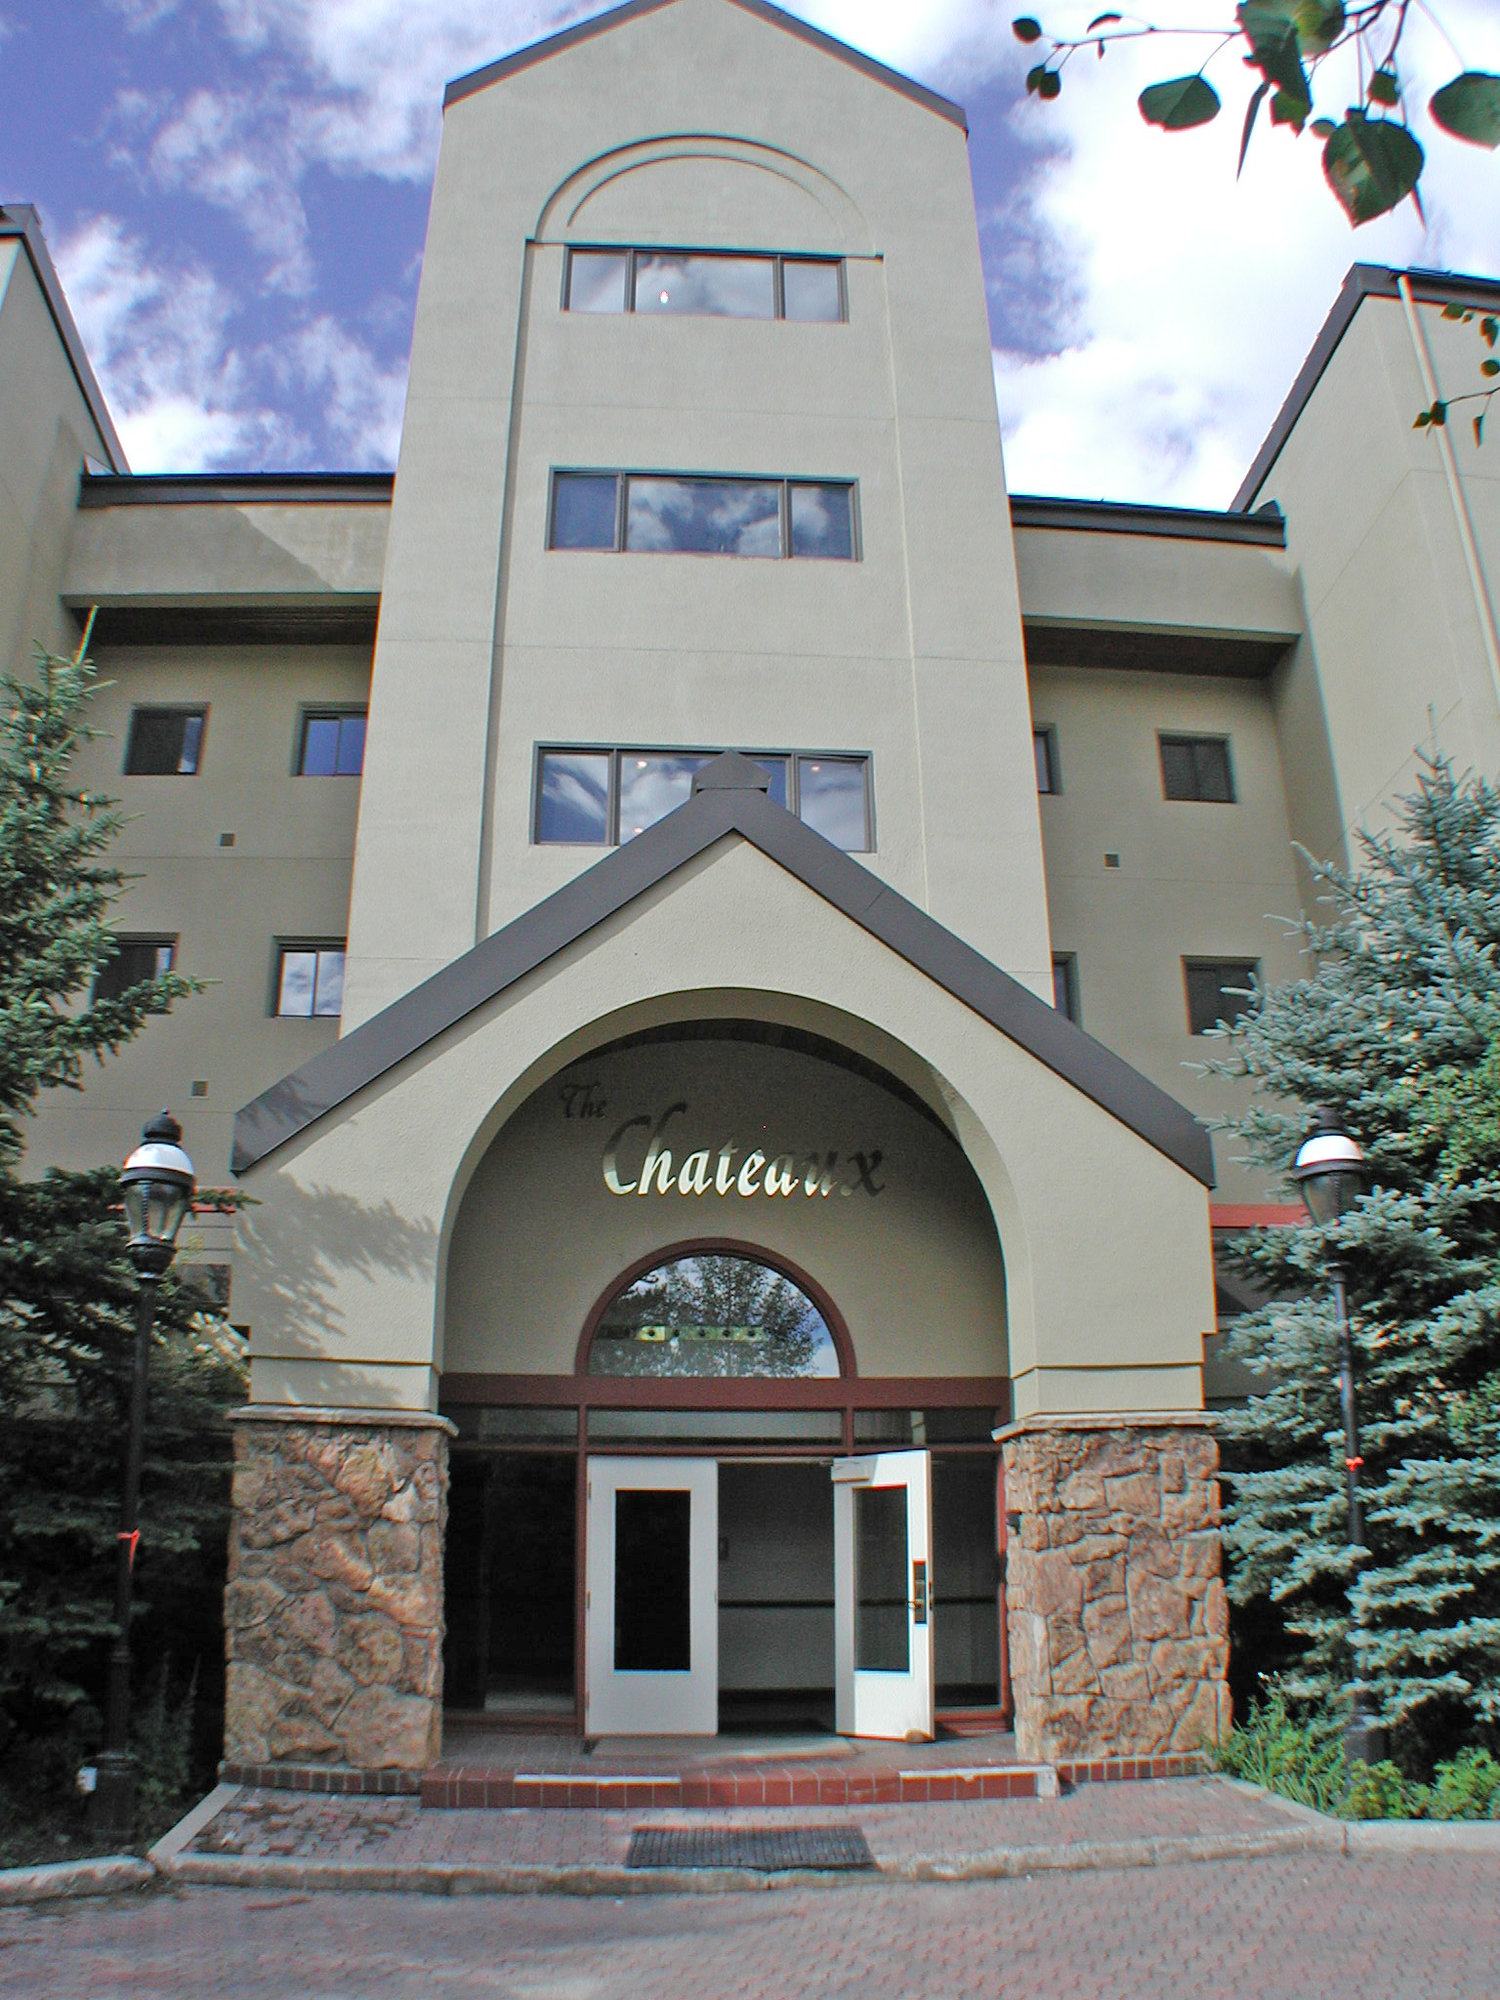 Chateaux Condos at the Village at Breckenridge